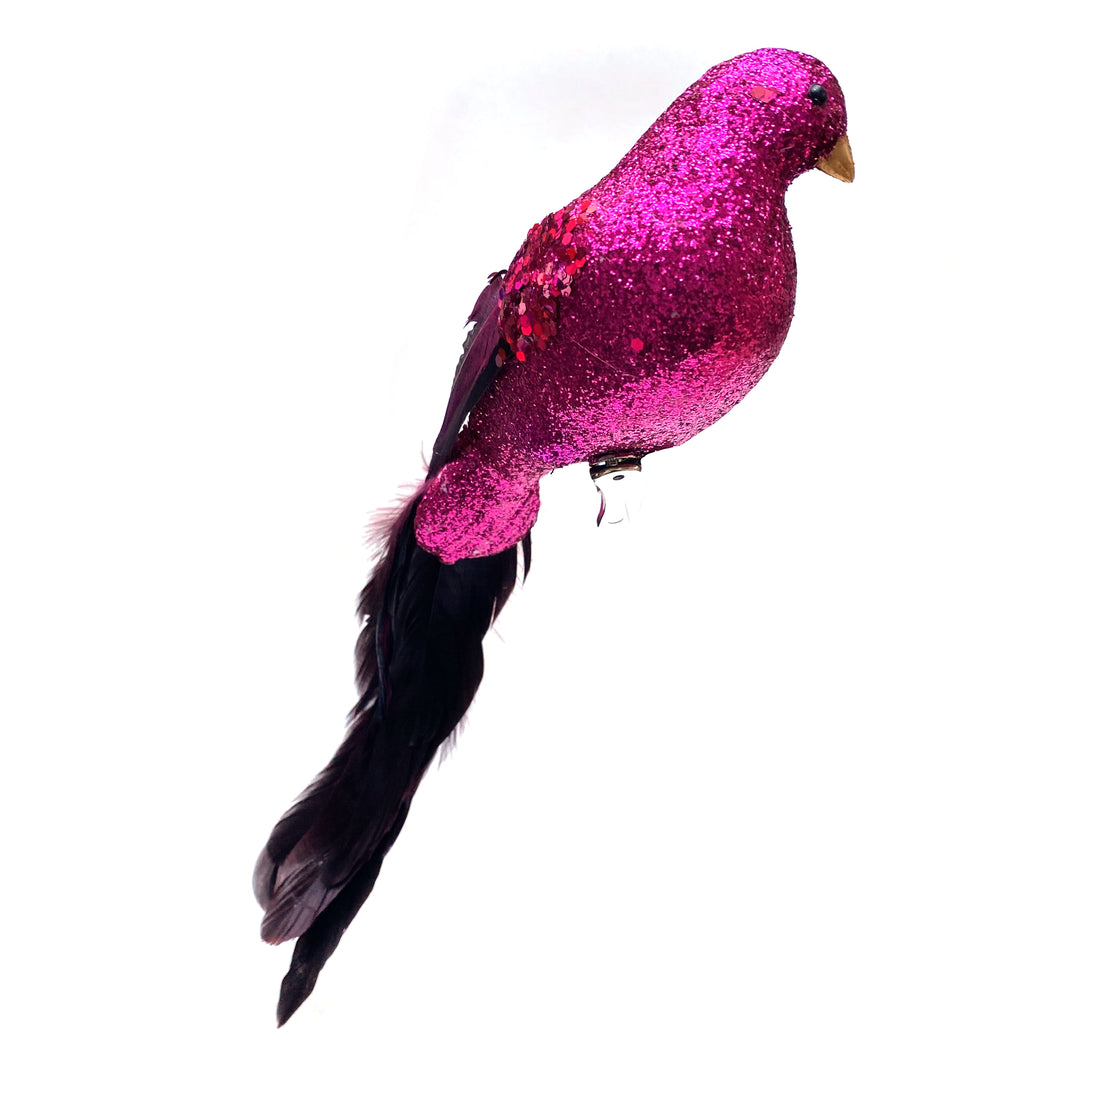 PINK LONG TAIL BIRD ON CLIP